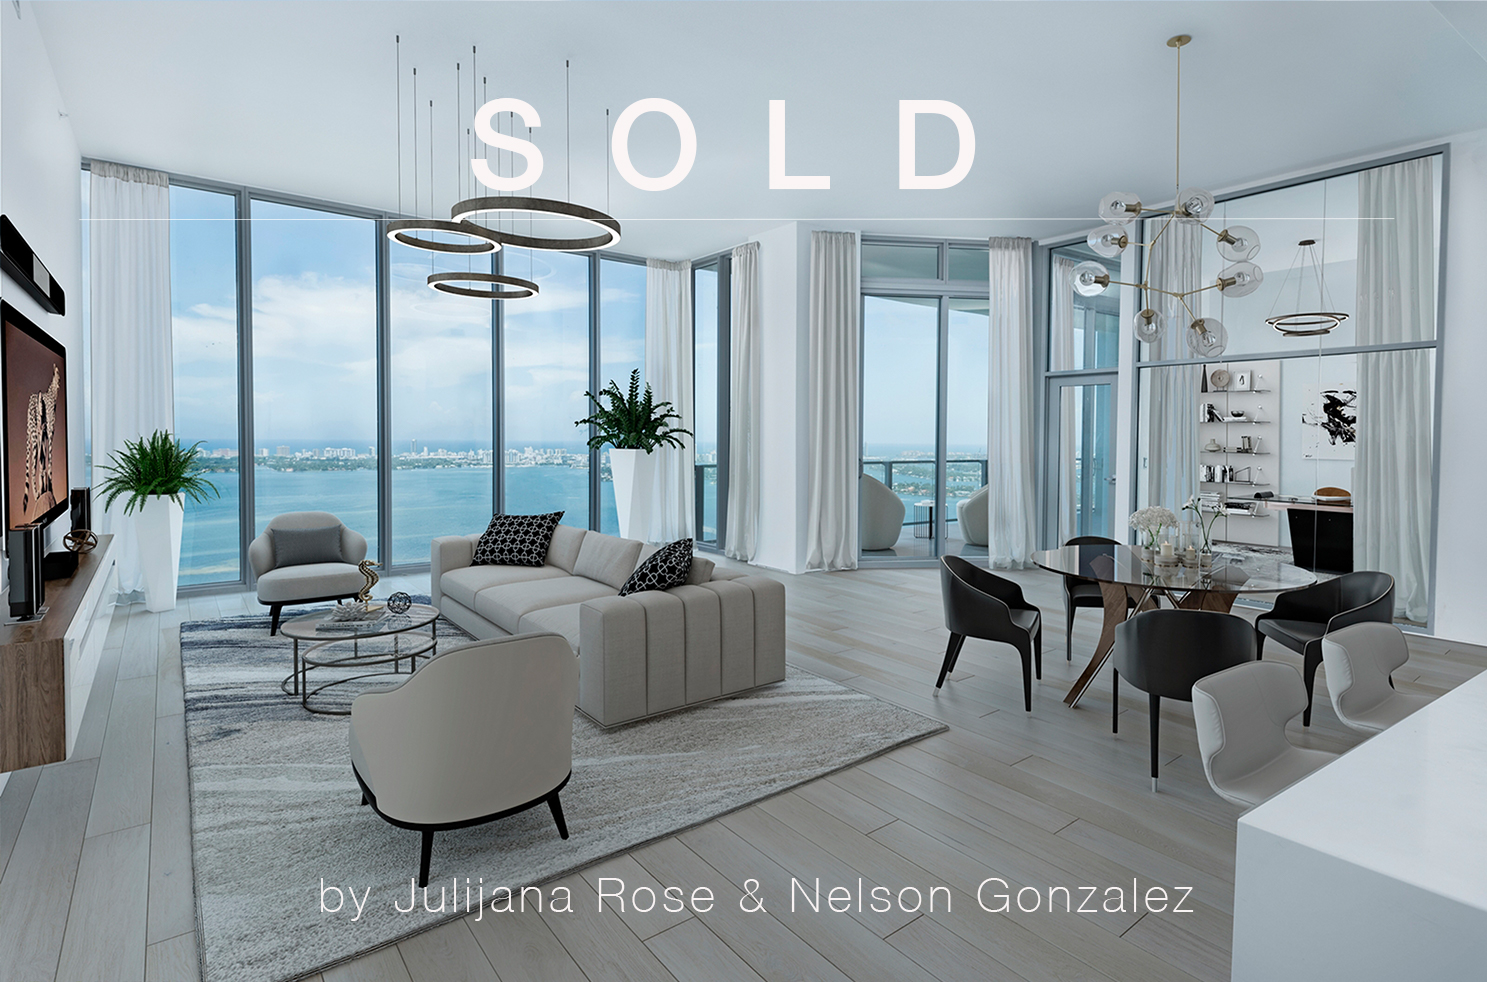 Sold by Julijana Rose and Nelson Gonzalez from The Nelson Gonzalez Team